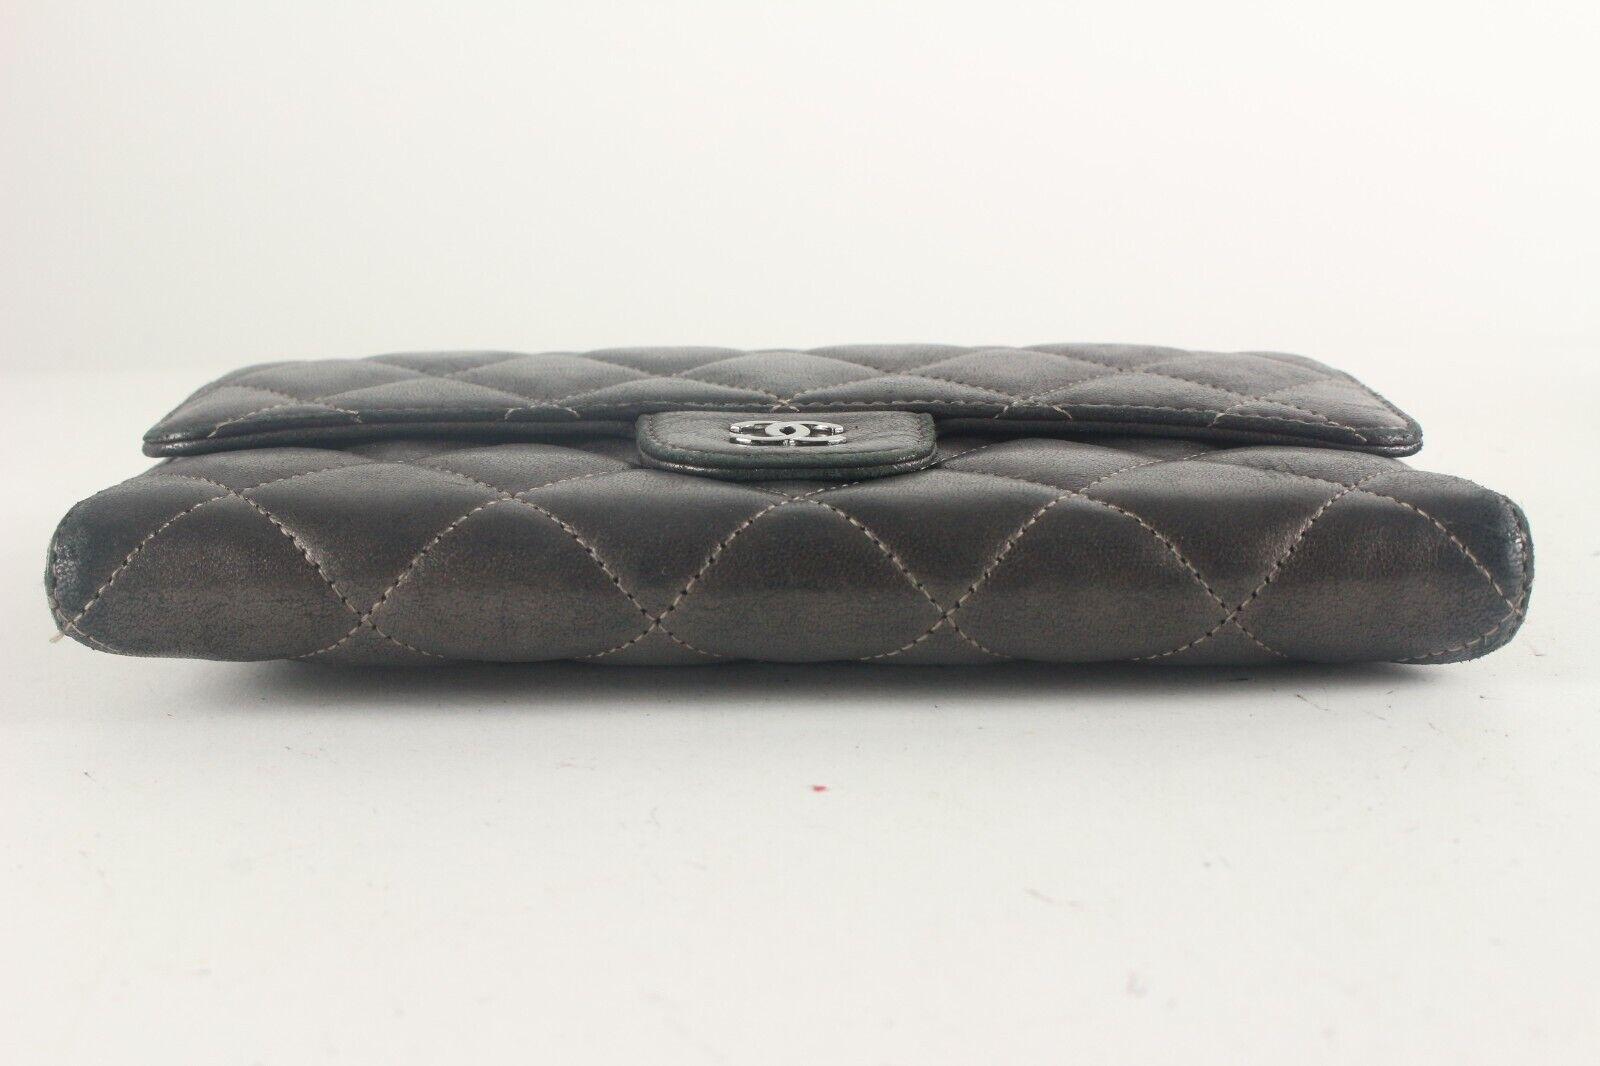 CHANEL Charcoal Grey Leathe Classic Flap Wallet 2CCS725K In Good Condition For Sale In Dix hills, NY